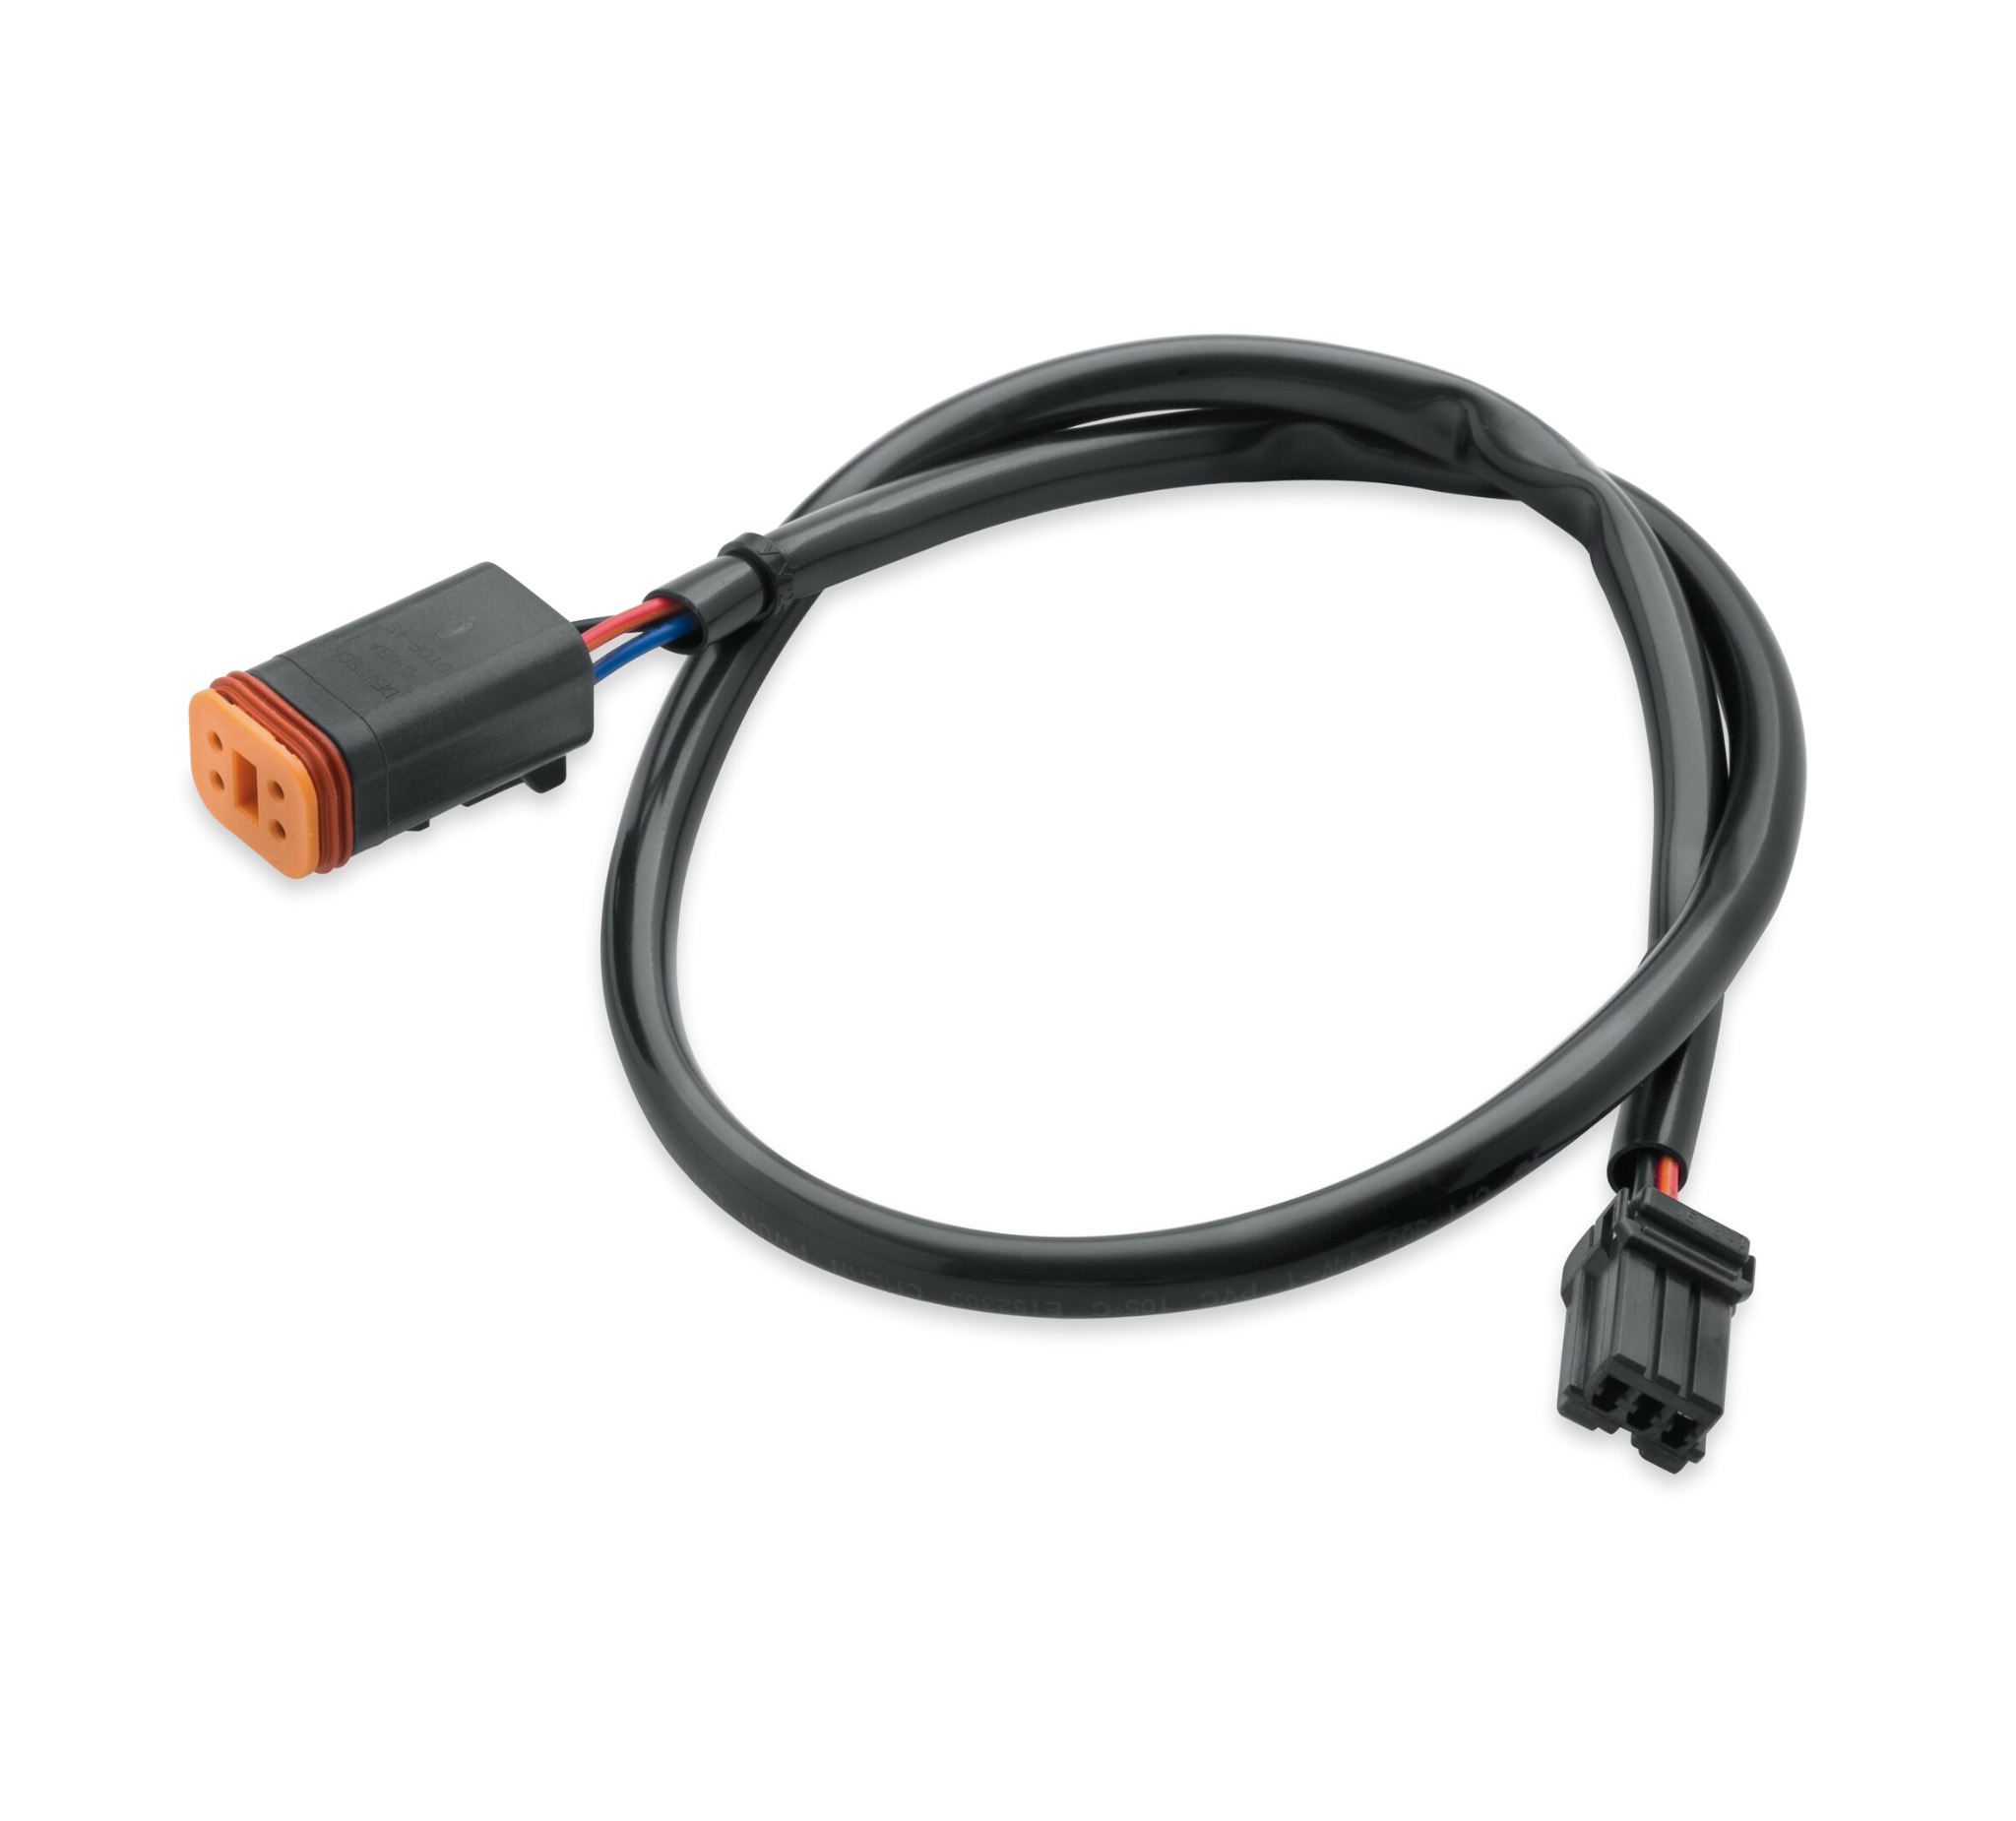 Hey, i already have lumbar support wiring harness in my car. I now bought  some seats that are heated. Do i need to buy the complete harness? Or can i  just buy